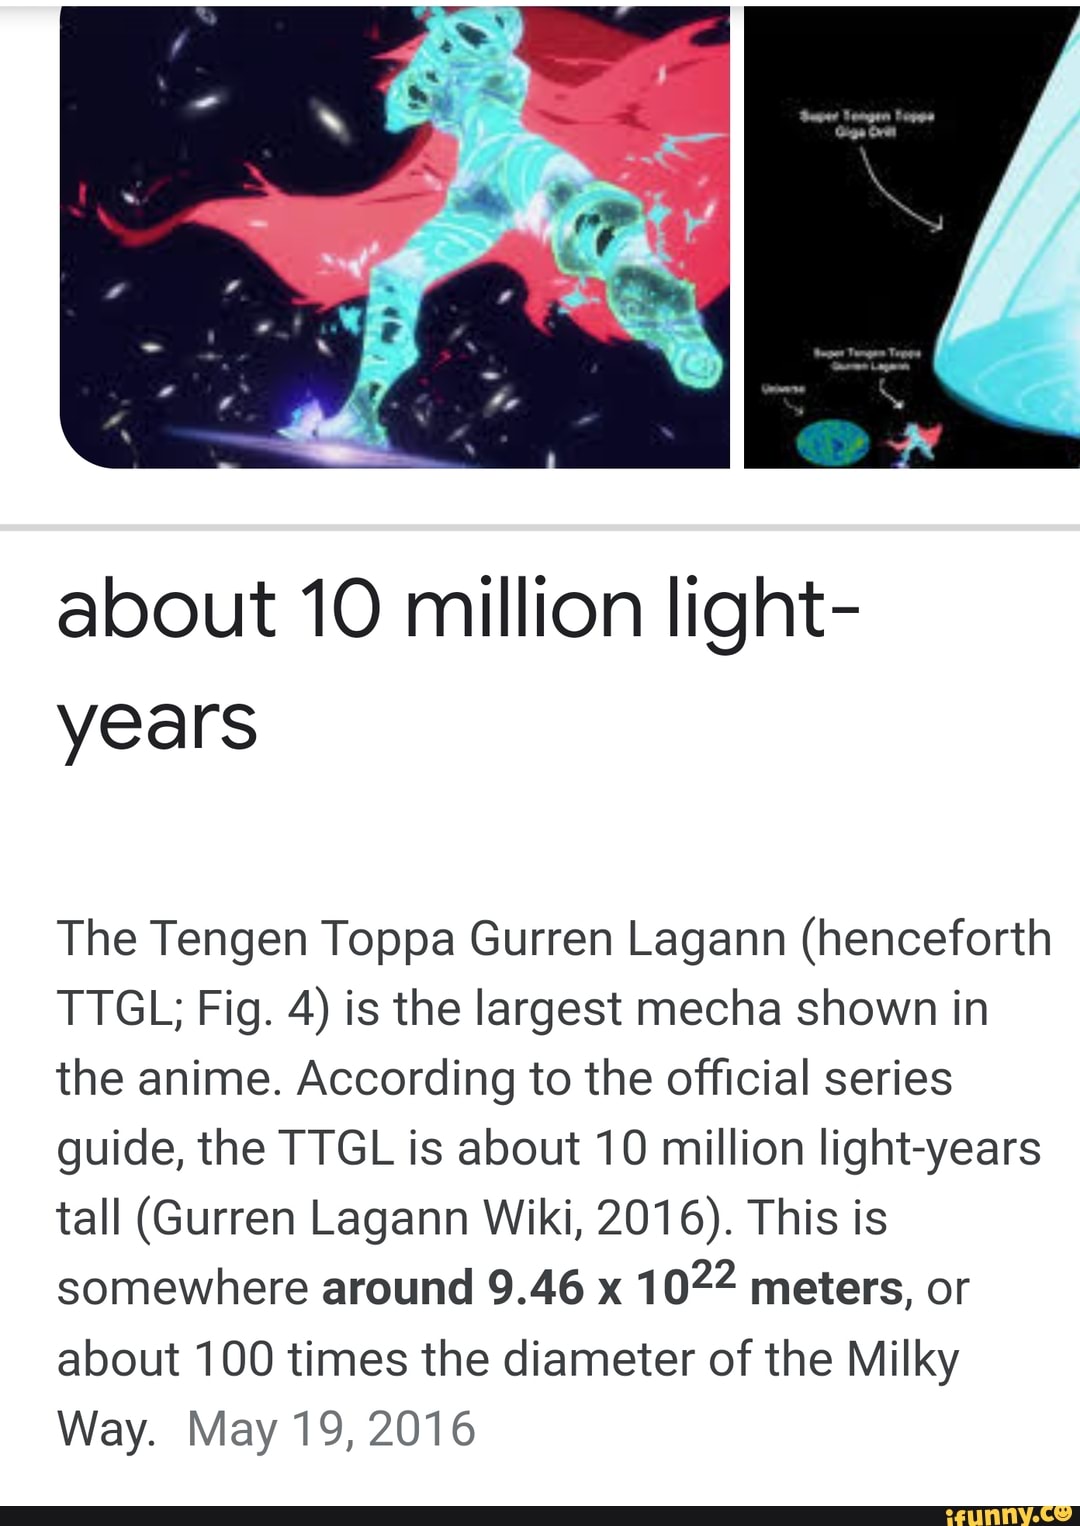 Gurren Lagann Wikia Tries To Explain The Physics Of It All, And It